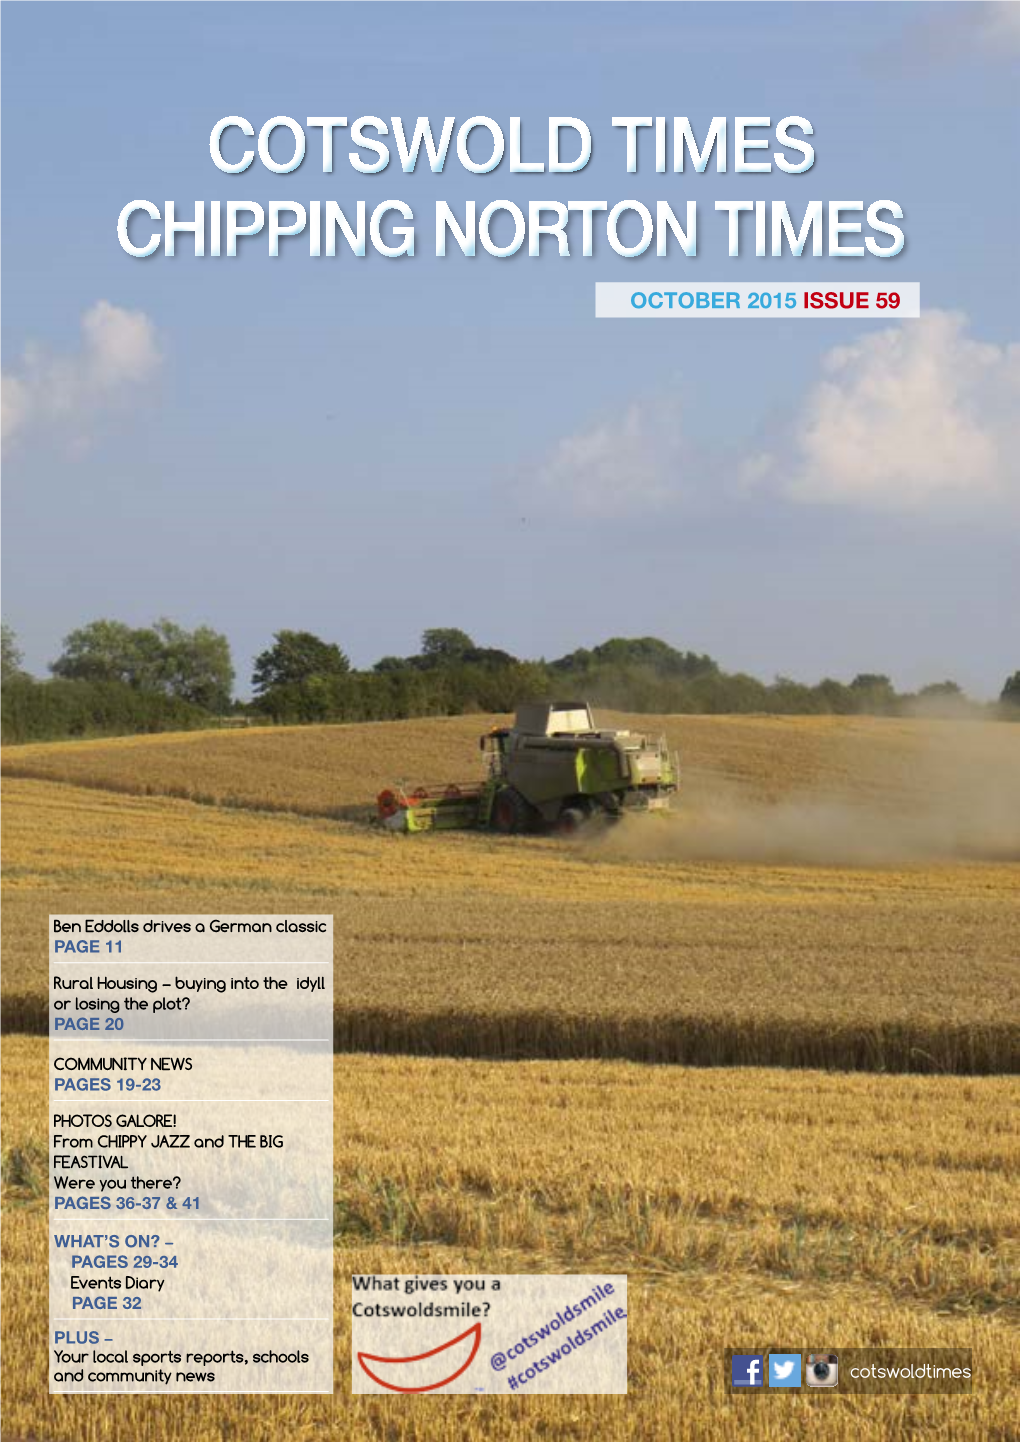 Chipping Norton Times Cotswold Times